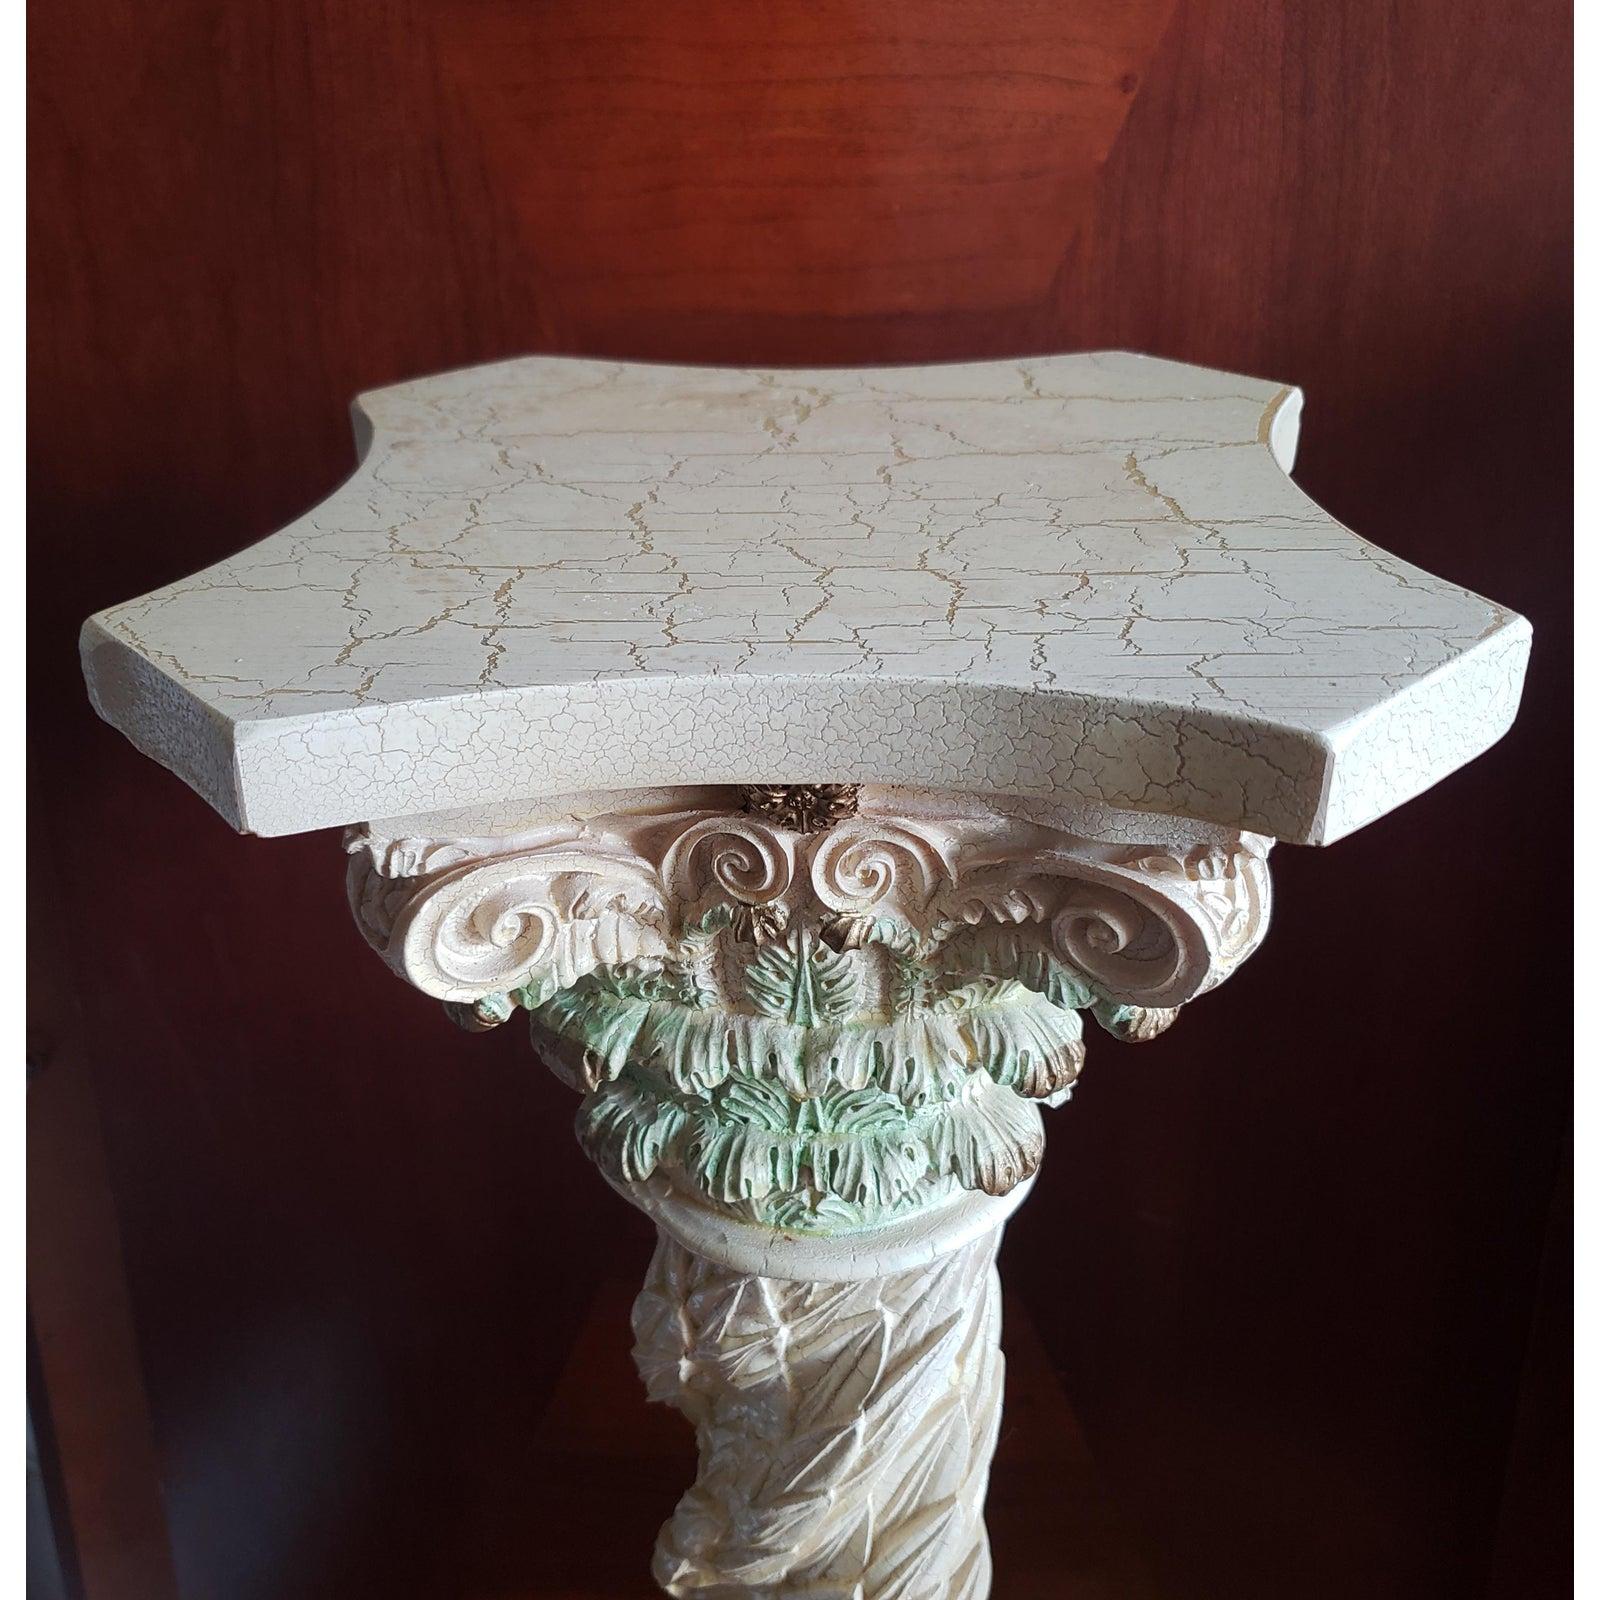 This exclusive roman / corinthian resin pedestal is designed to grace the luxurious rooms of an English manor and whispers pure elegance. The roman / corinthian style is embellished with an intricately carved top and acanthus leaves trunk cast in